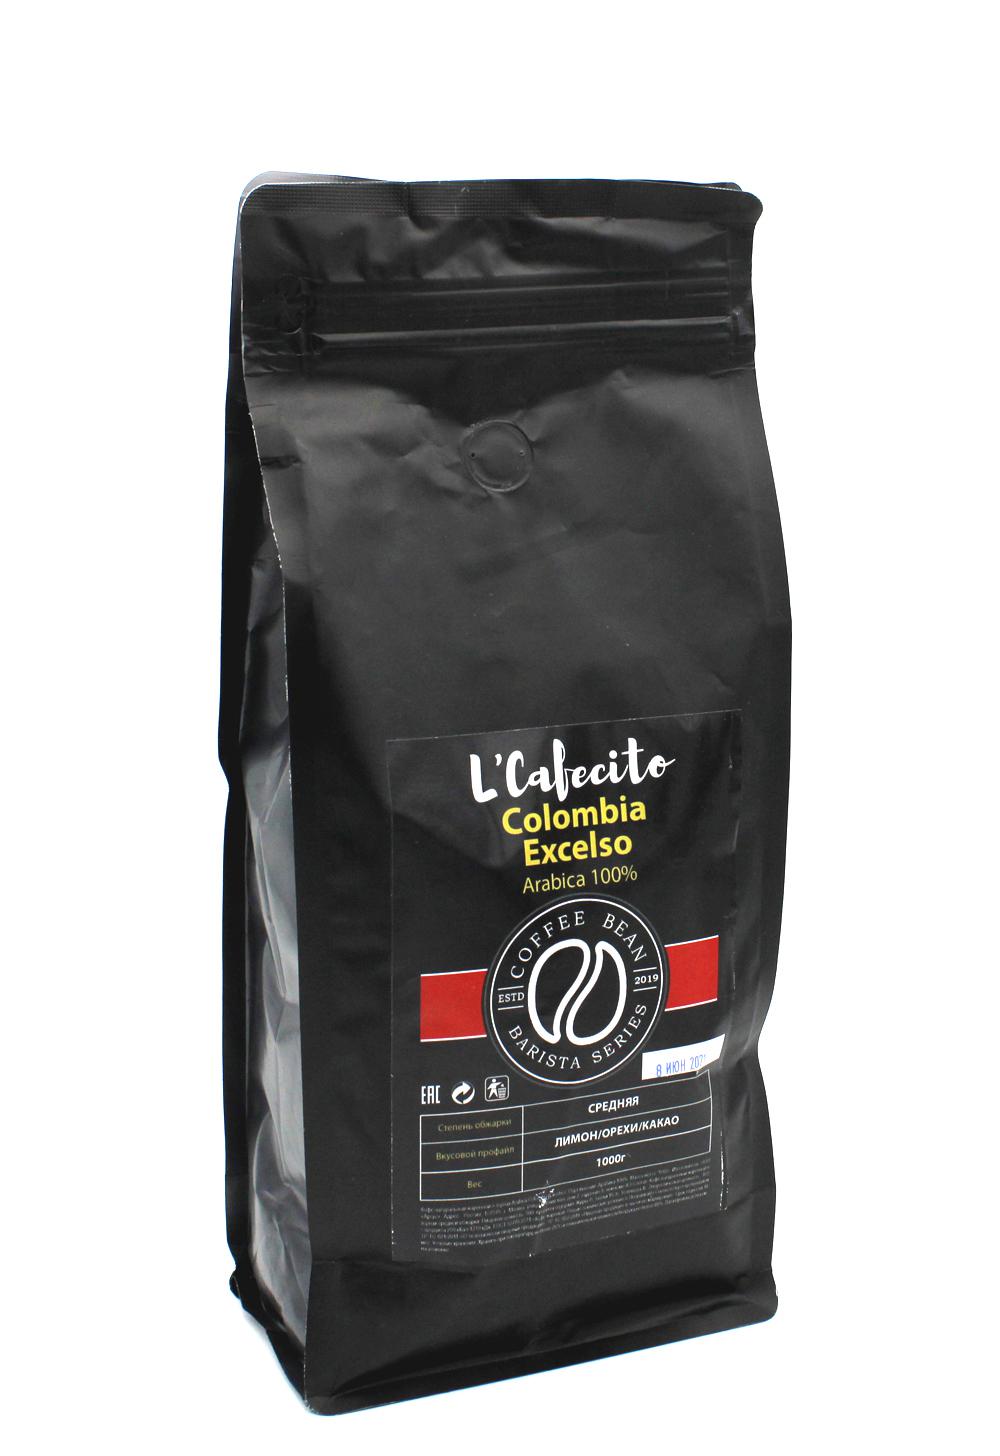 Кофе в зернах L'Cafecito Colombia Excelso Arabica 100%